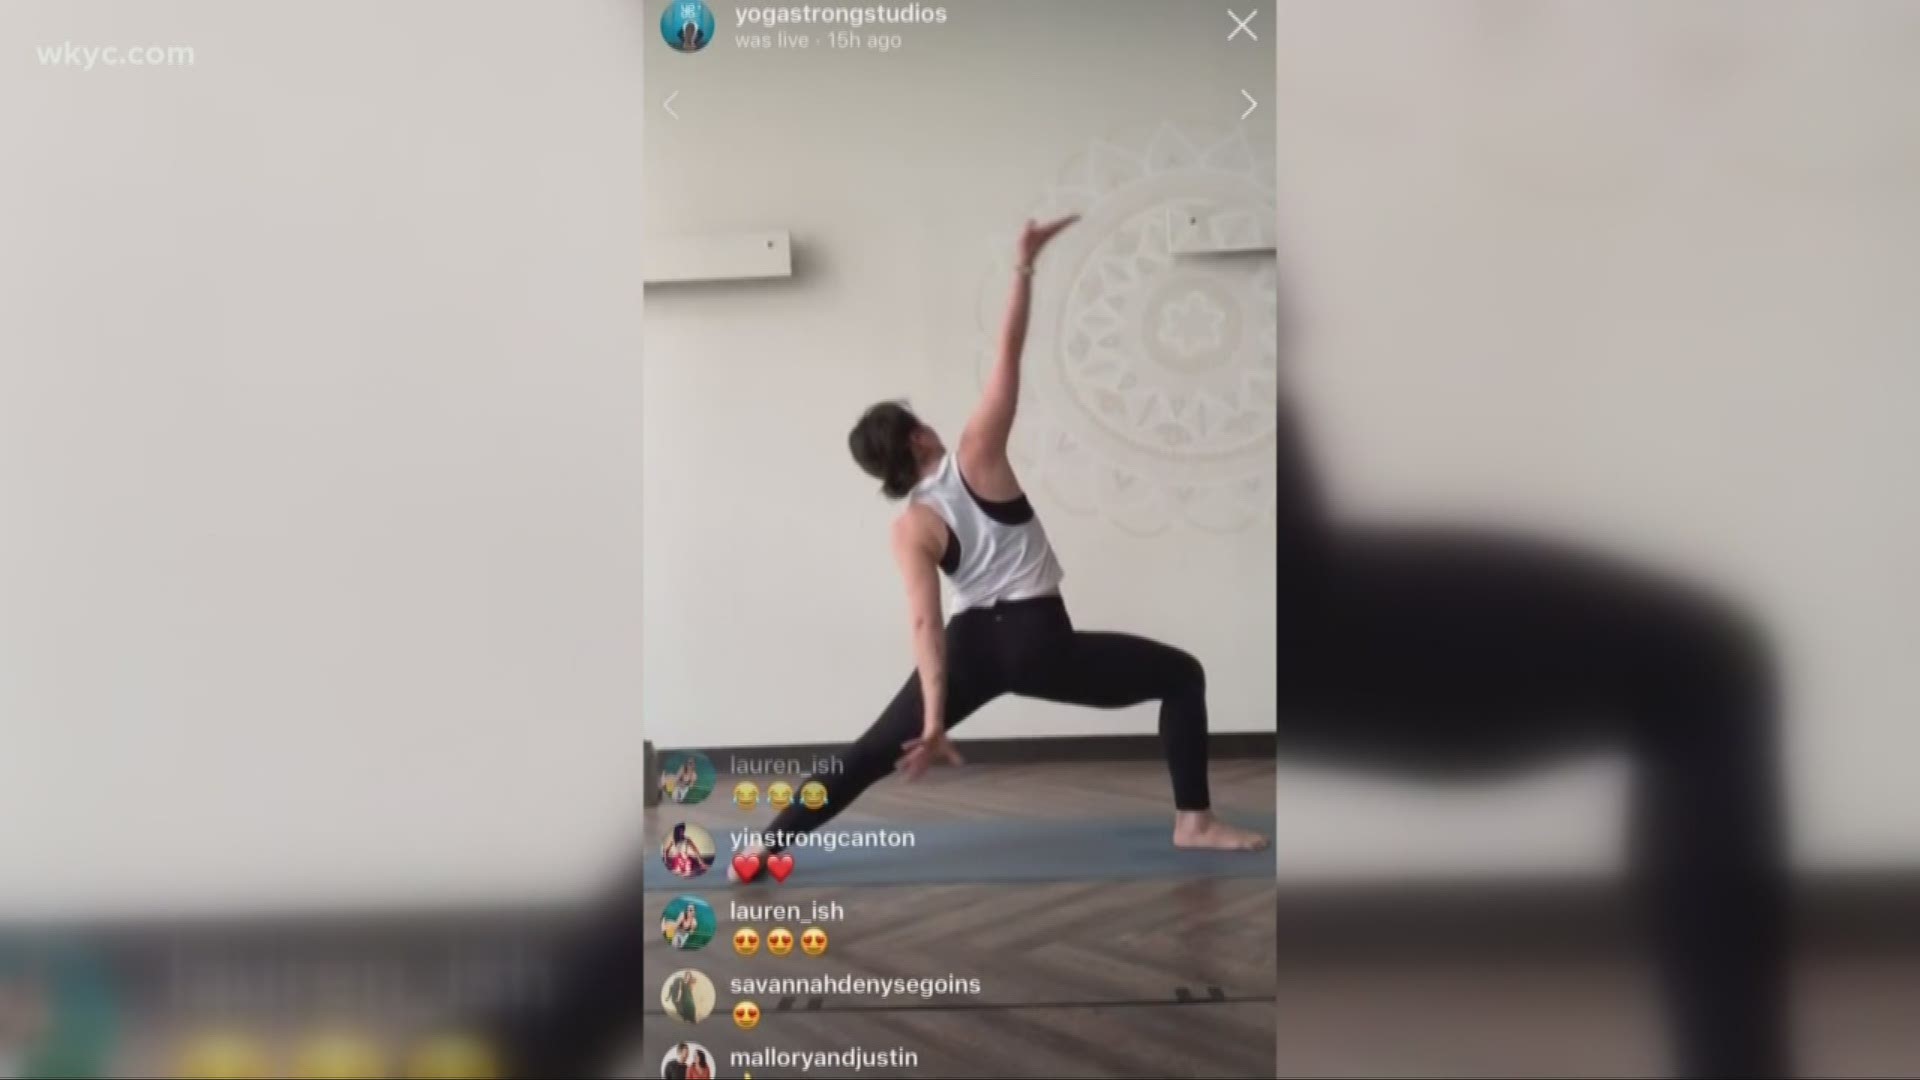 Are you still trying to get exercise even though you can't get into the gyms? There are plenty of live streaming exercise and yoga classes available right now.